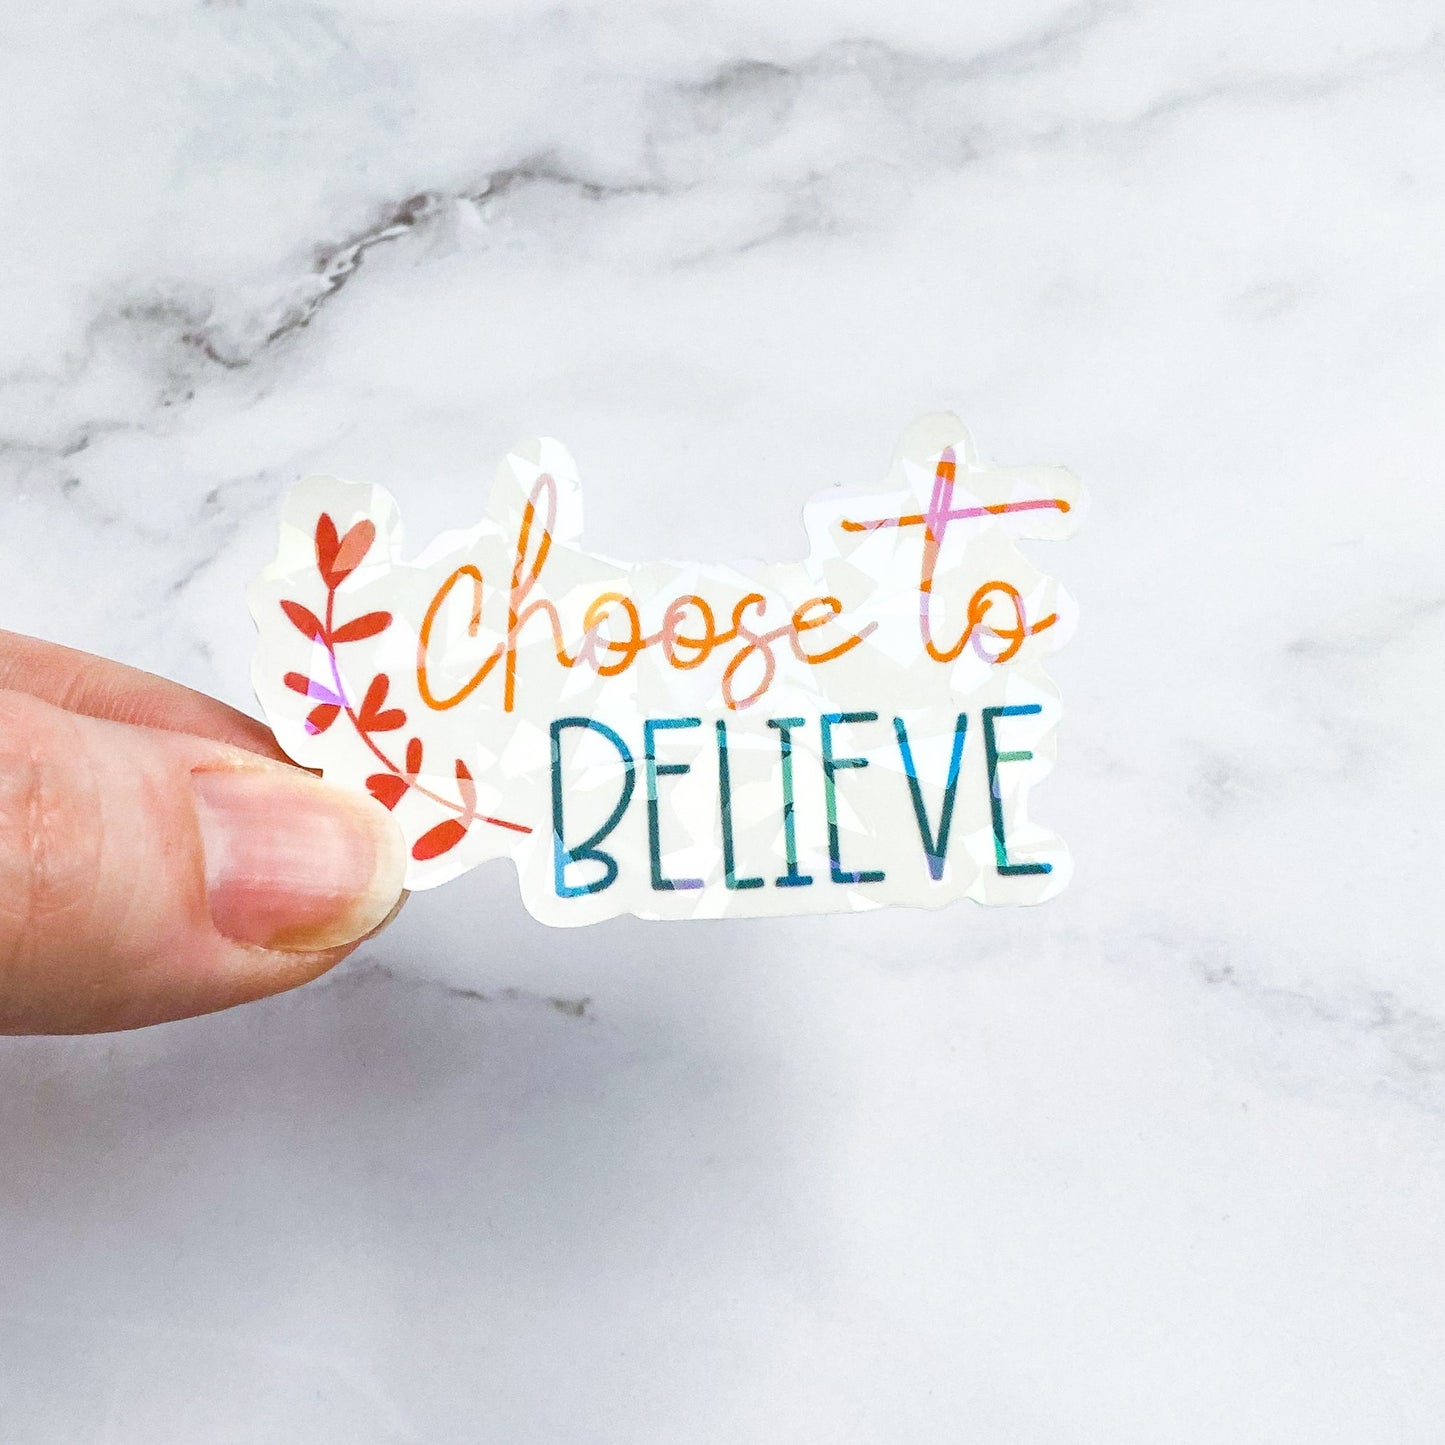 Choose to Believe Holographic Sticker